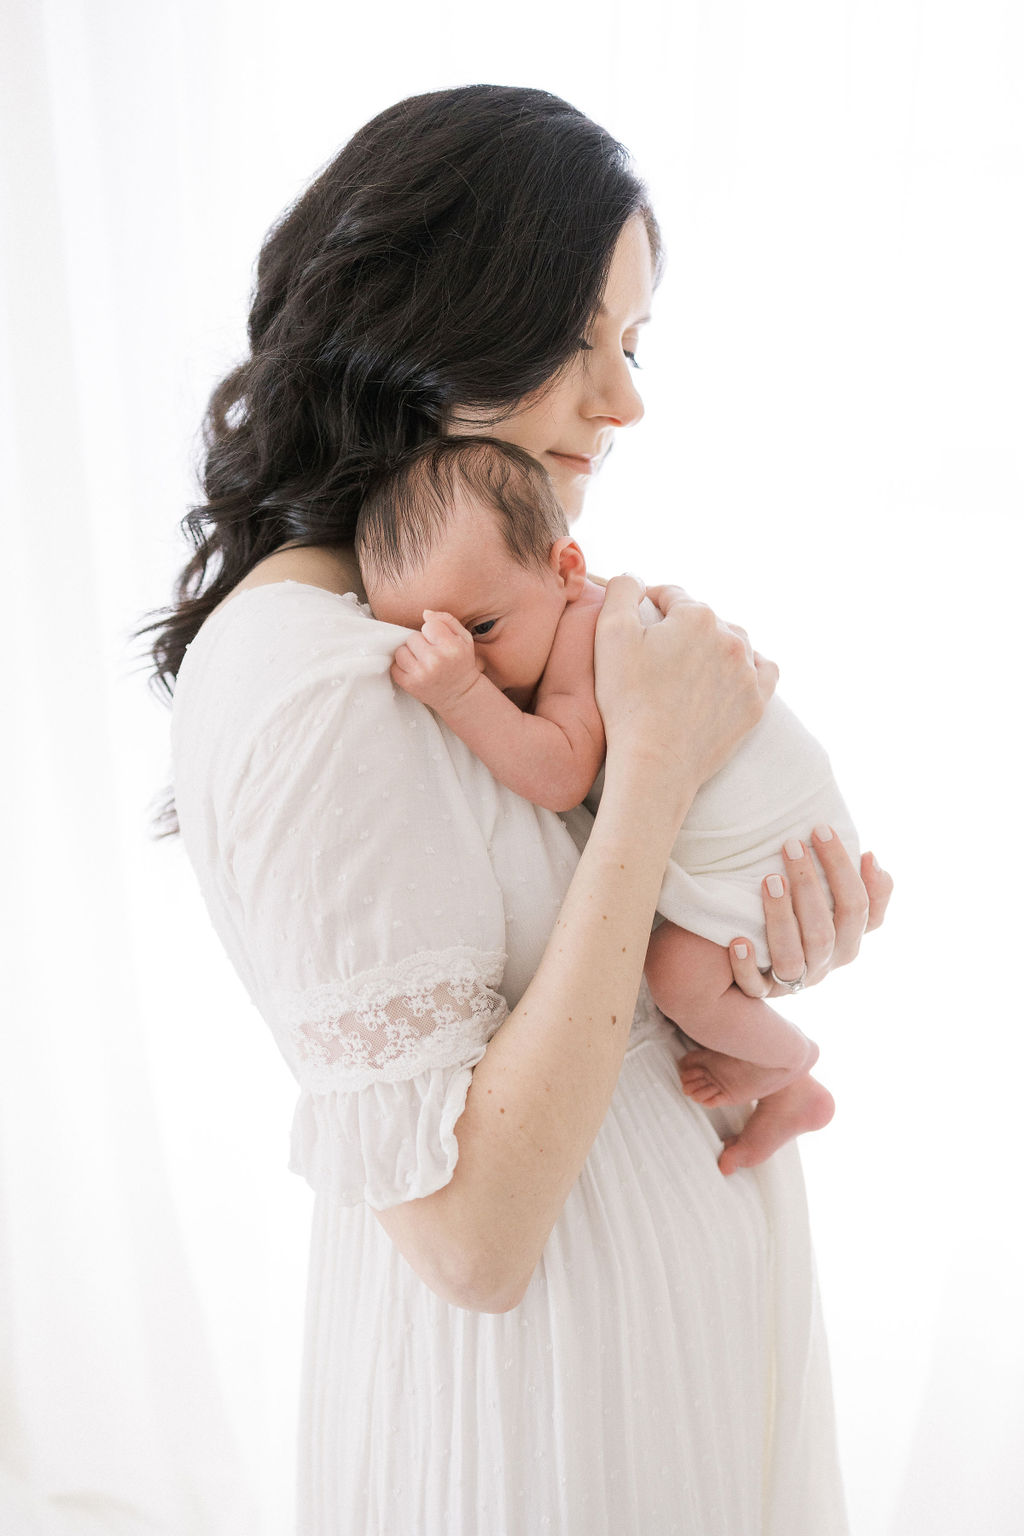 A new mom stands in a window cradling her newborn baby on her shoulder in a white dress thanks to holistic obgyn nj